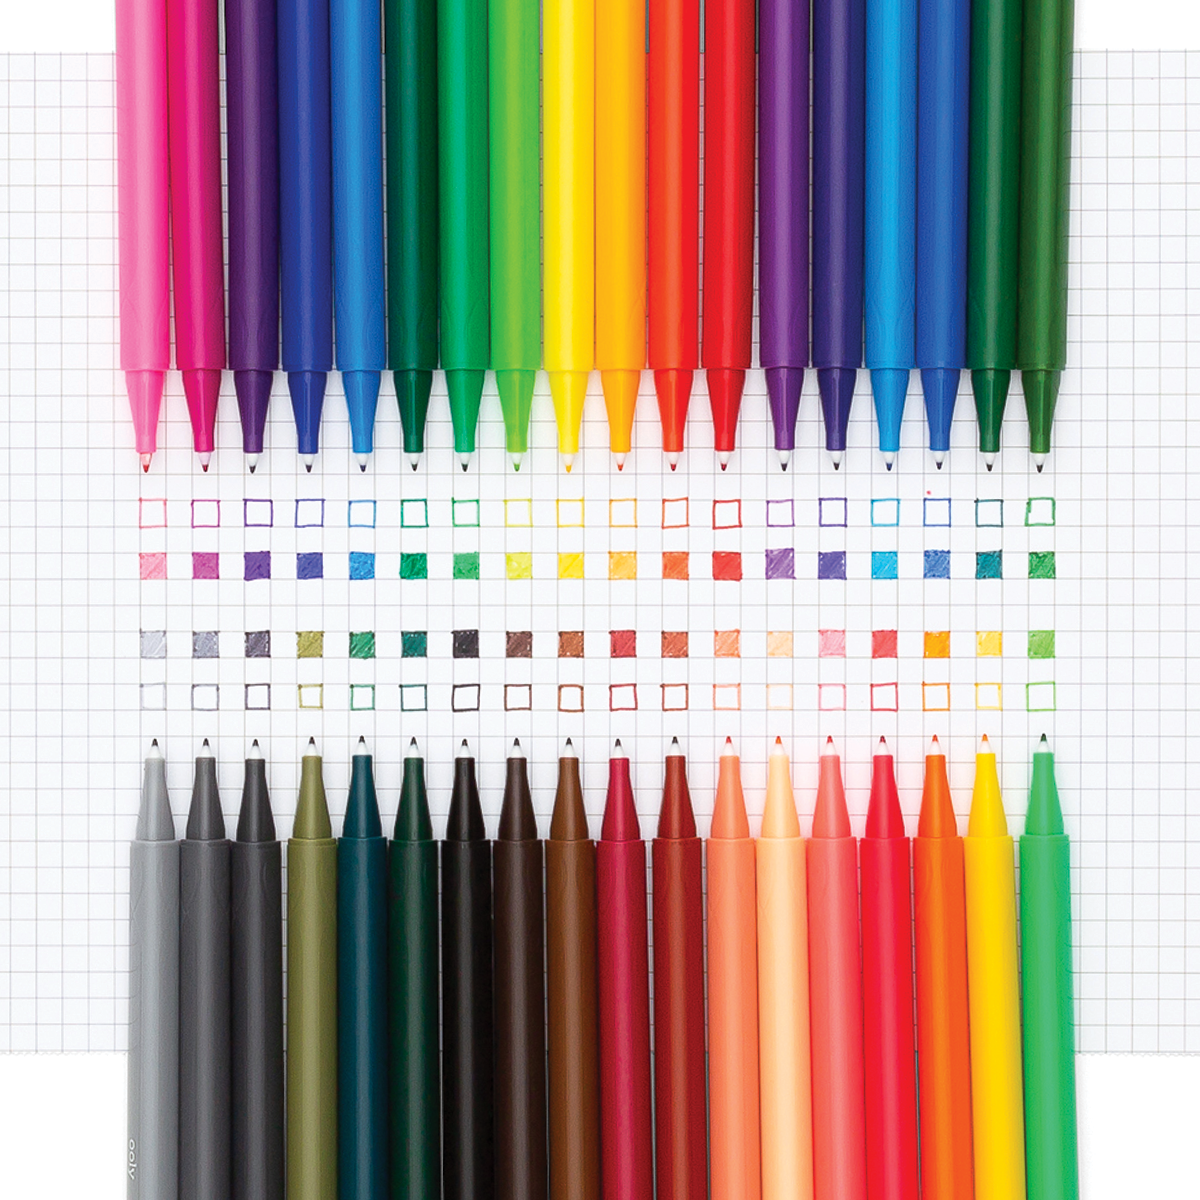 Coloring Bundle with Paper Roll, Markers, and Paint Sticks